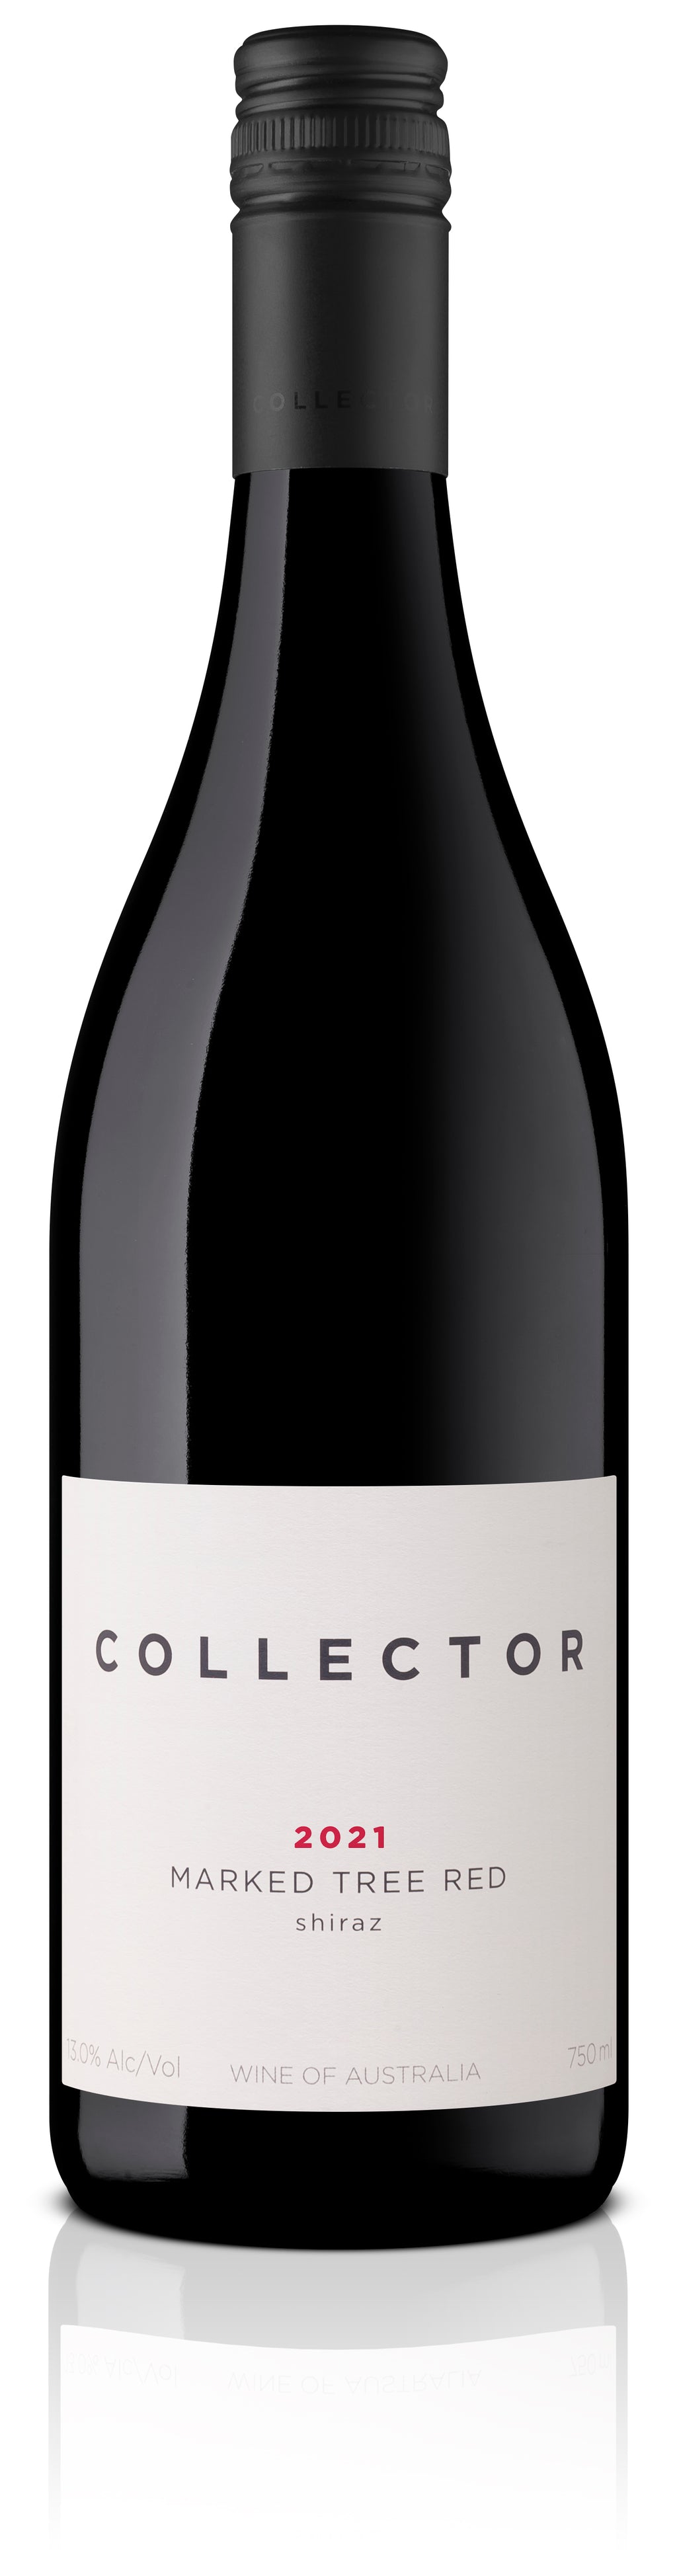 New Release - Marked Tree Red Shiraz 2021